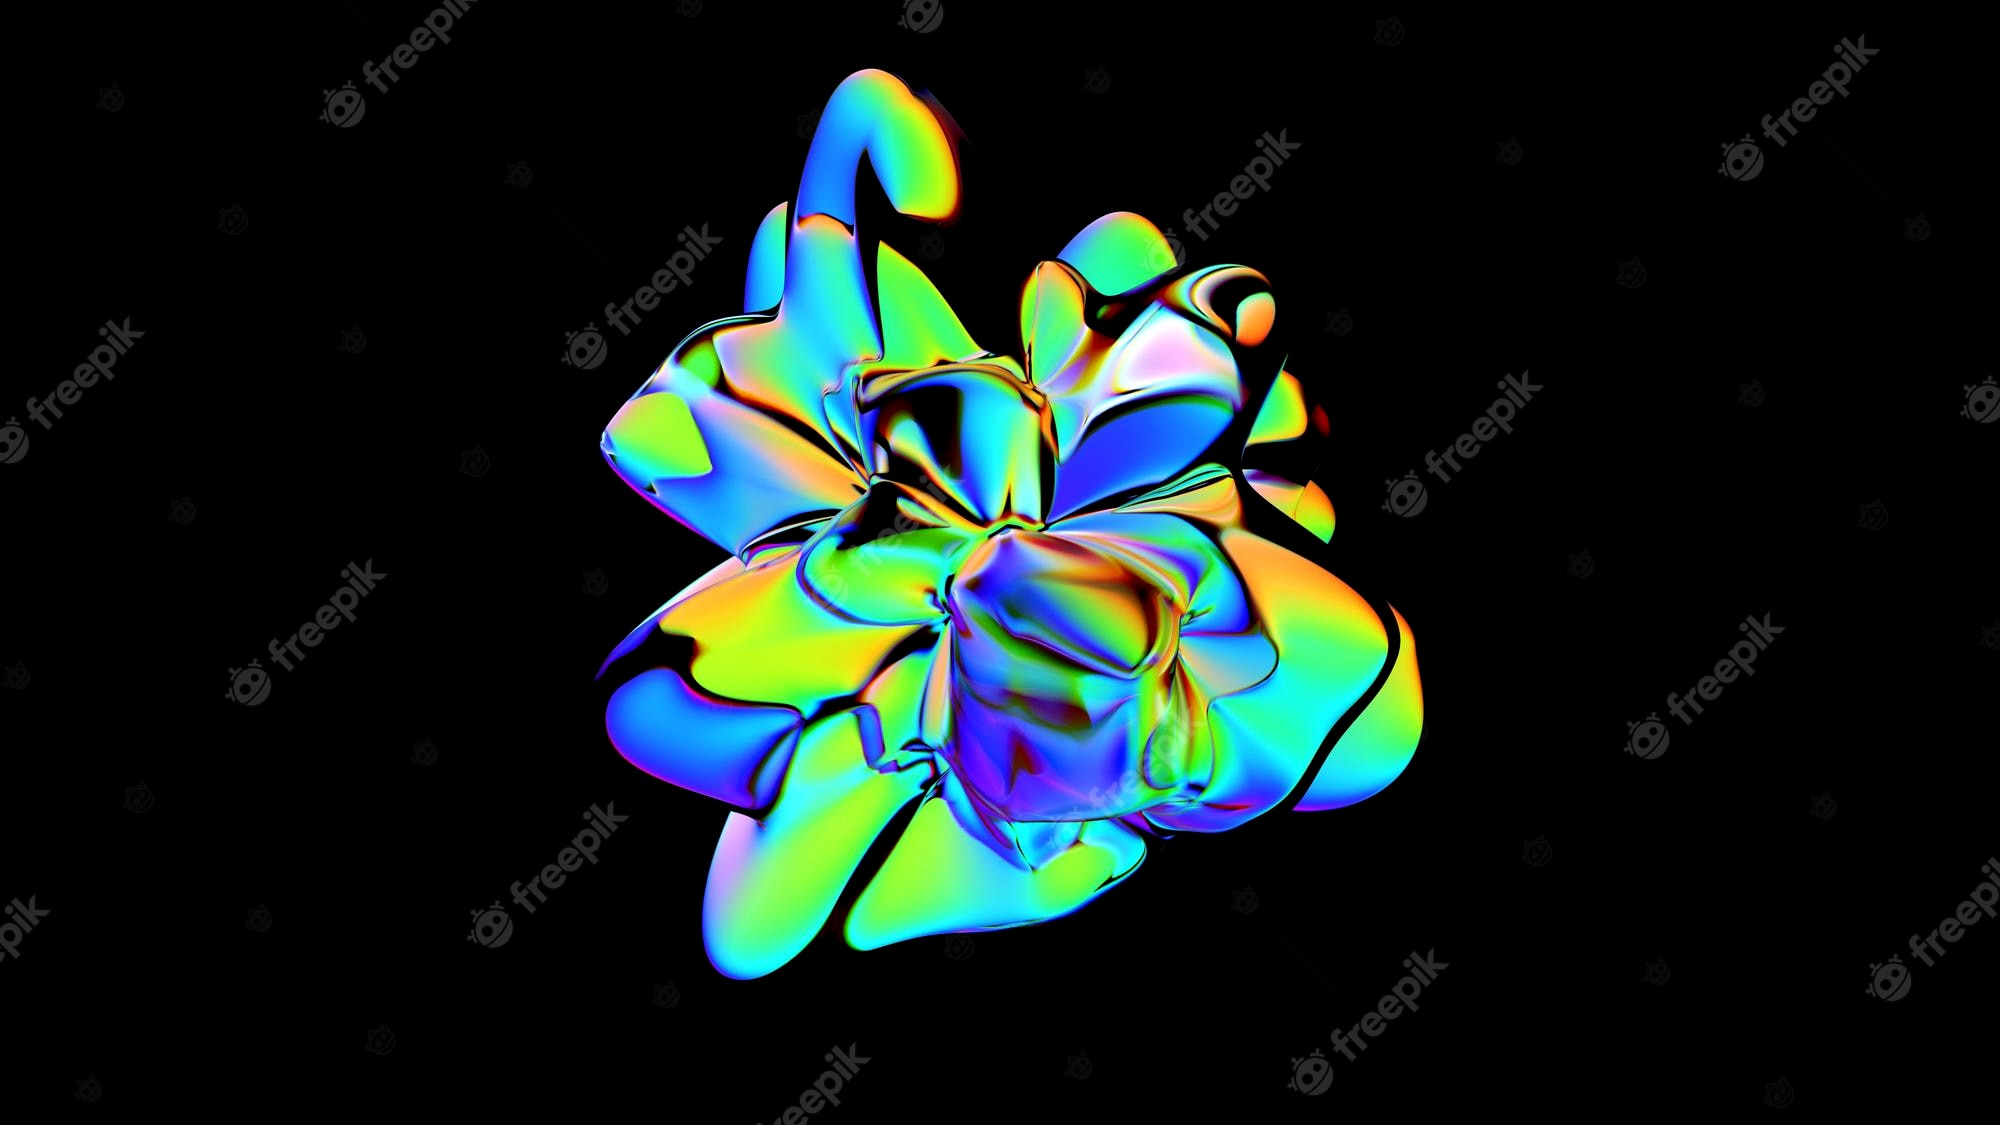 Premium photo d rendered abstract colorful shape with detailed reflection and dispersion